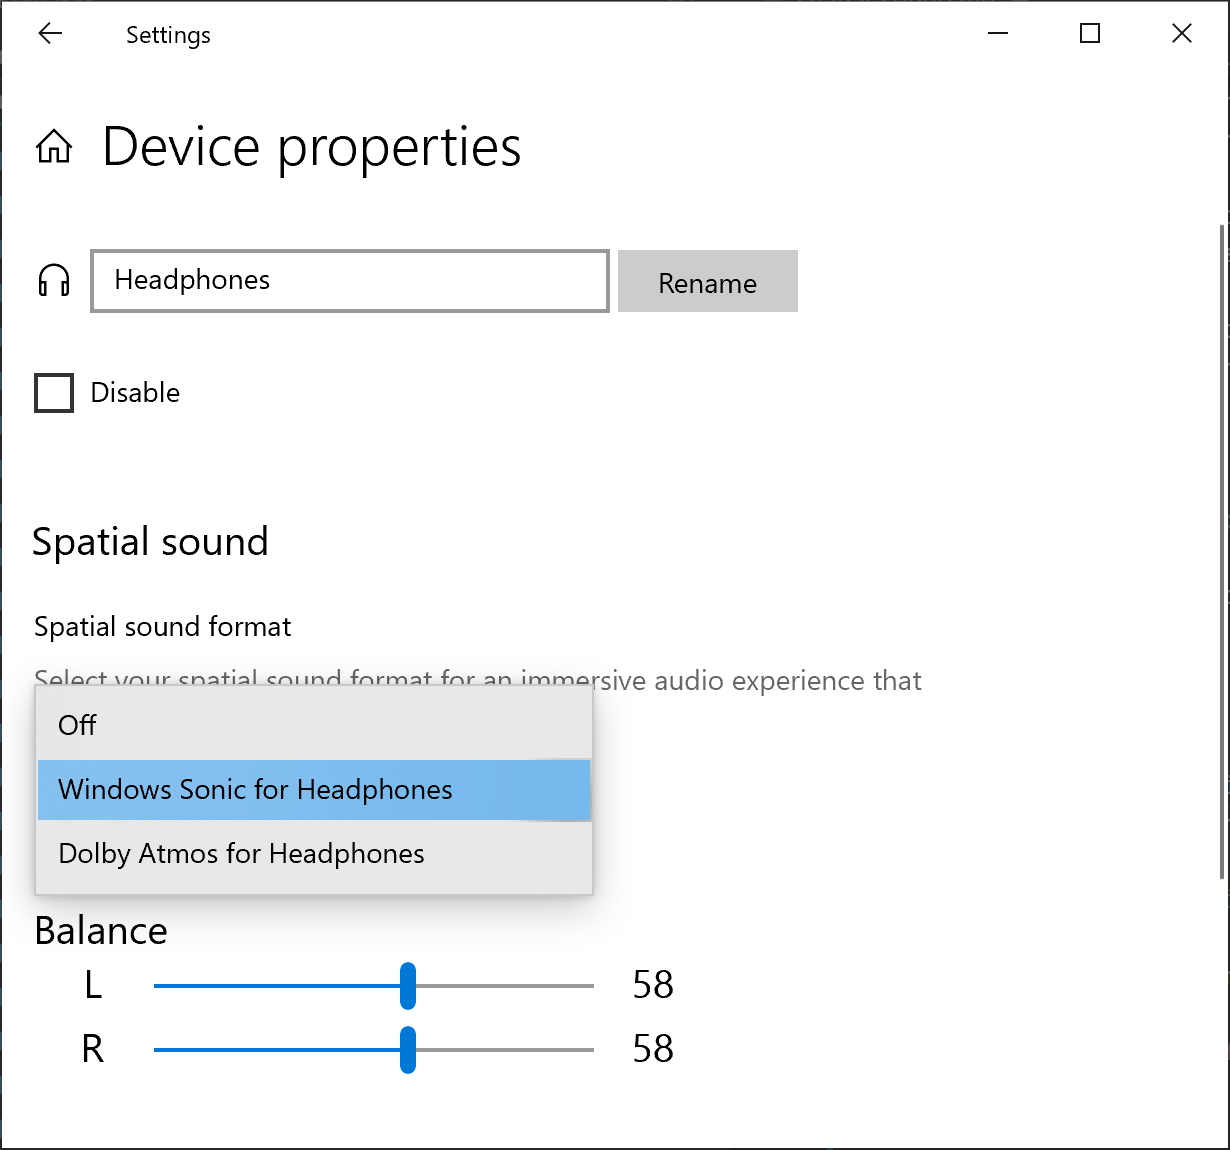 Adjust sound formats by right-clicking on your headphones and selecting Properties.
Go to the Advanced tab and select a different format, then click Apply and OK to save the changes.